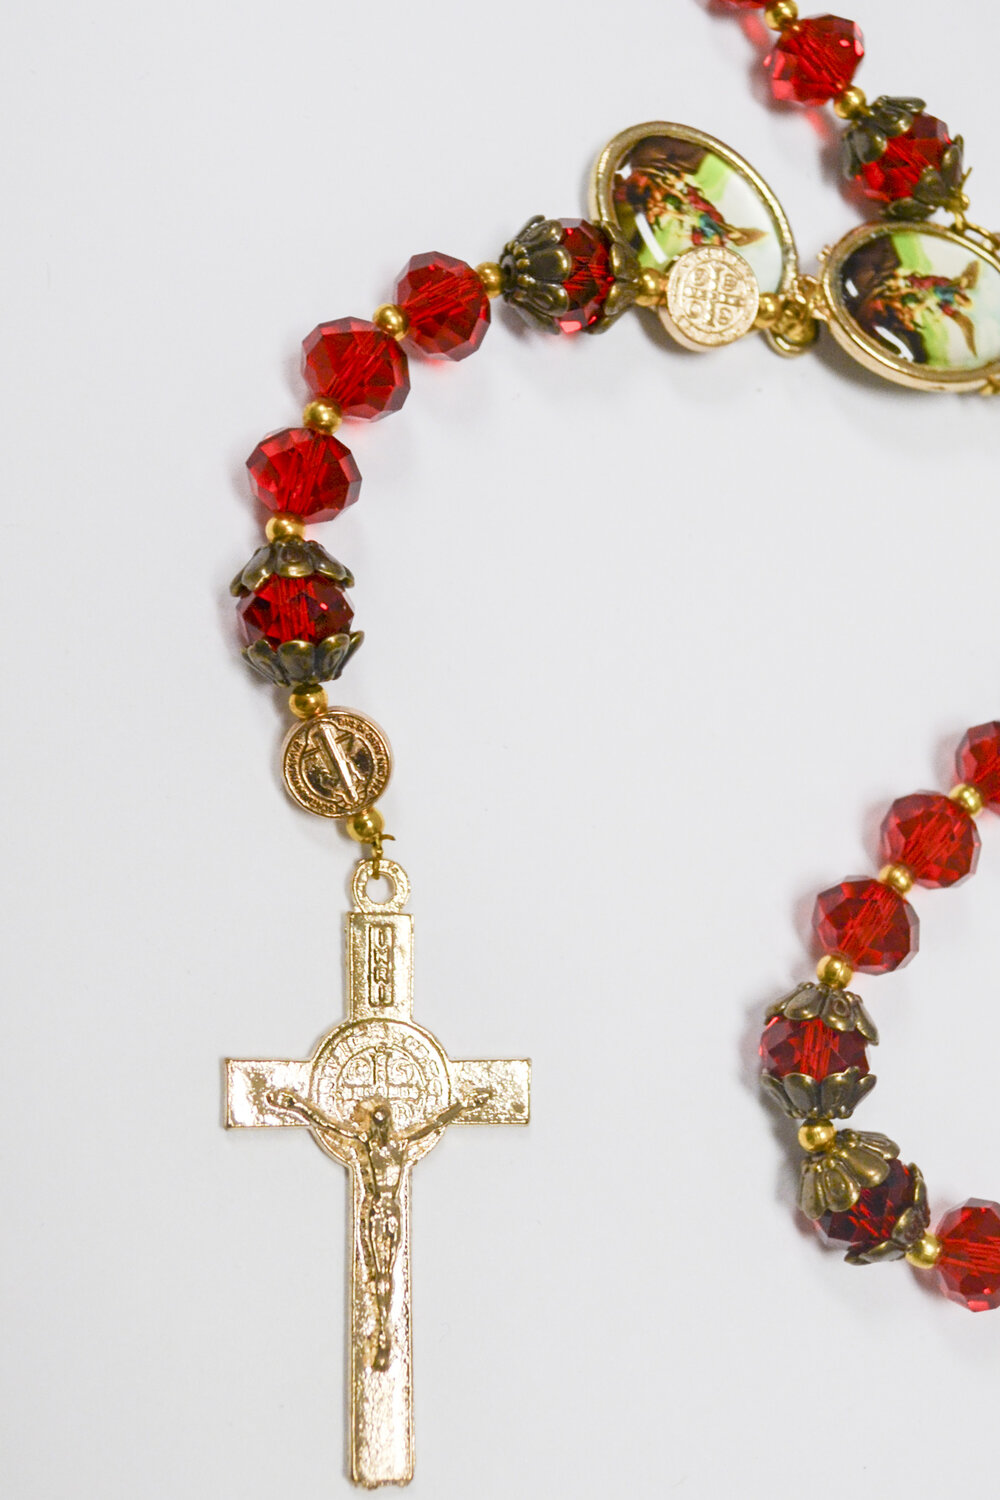 Mixed Bead Rosary (Red Crystal, Rose Gold Crystal, Matte Pearl) — Out of  the Blue Bead Works